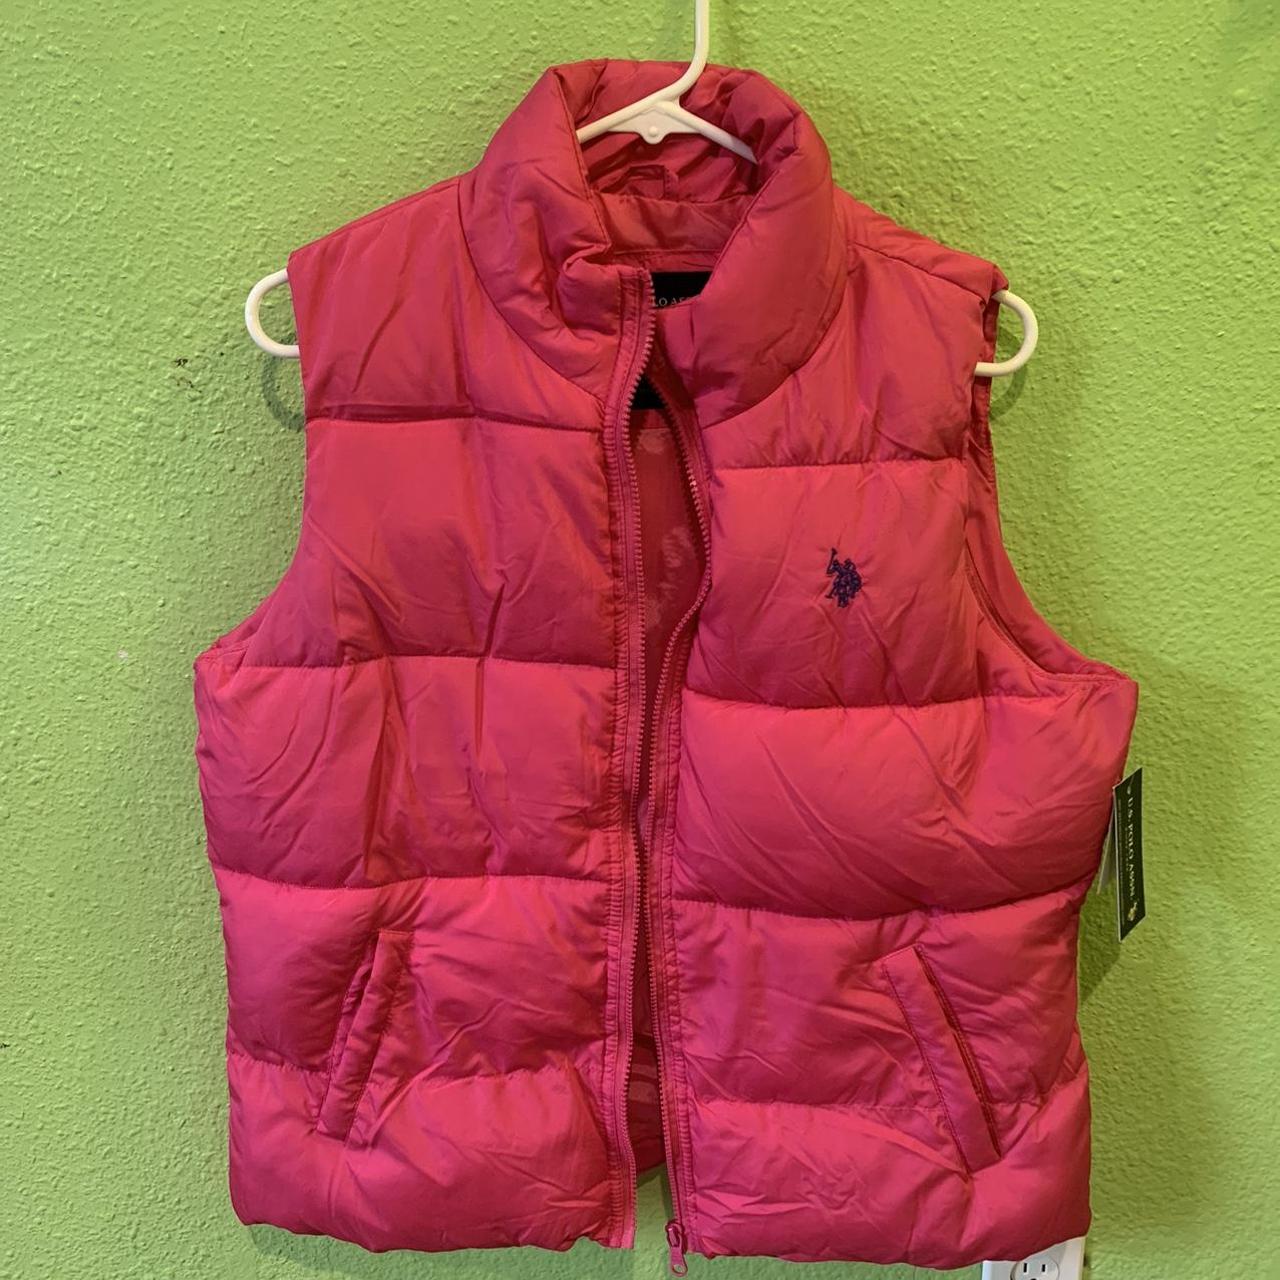 pink polo vest with tags - Depop